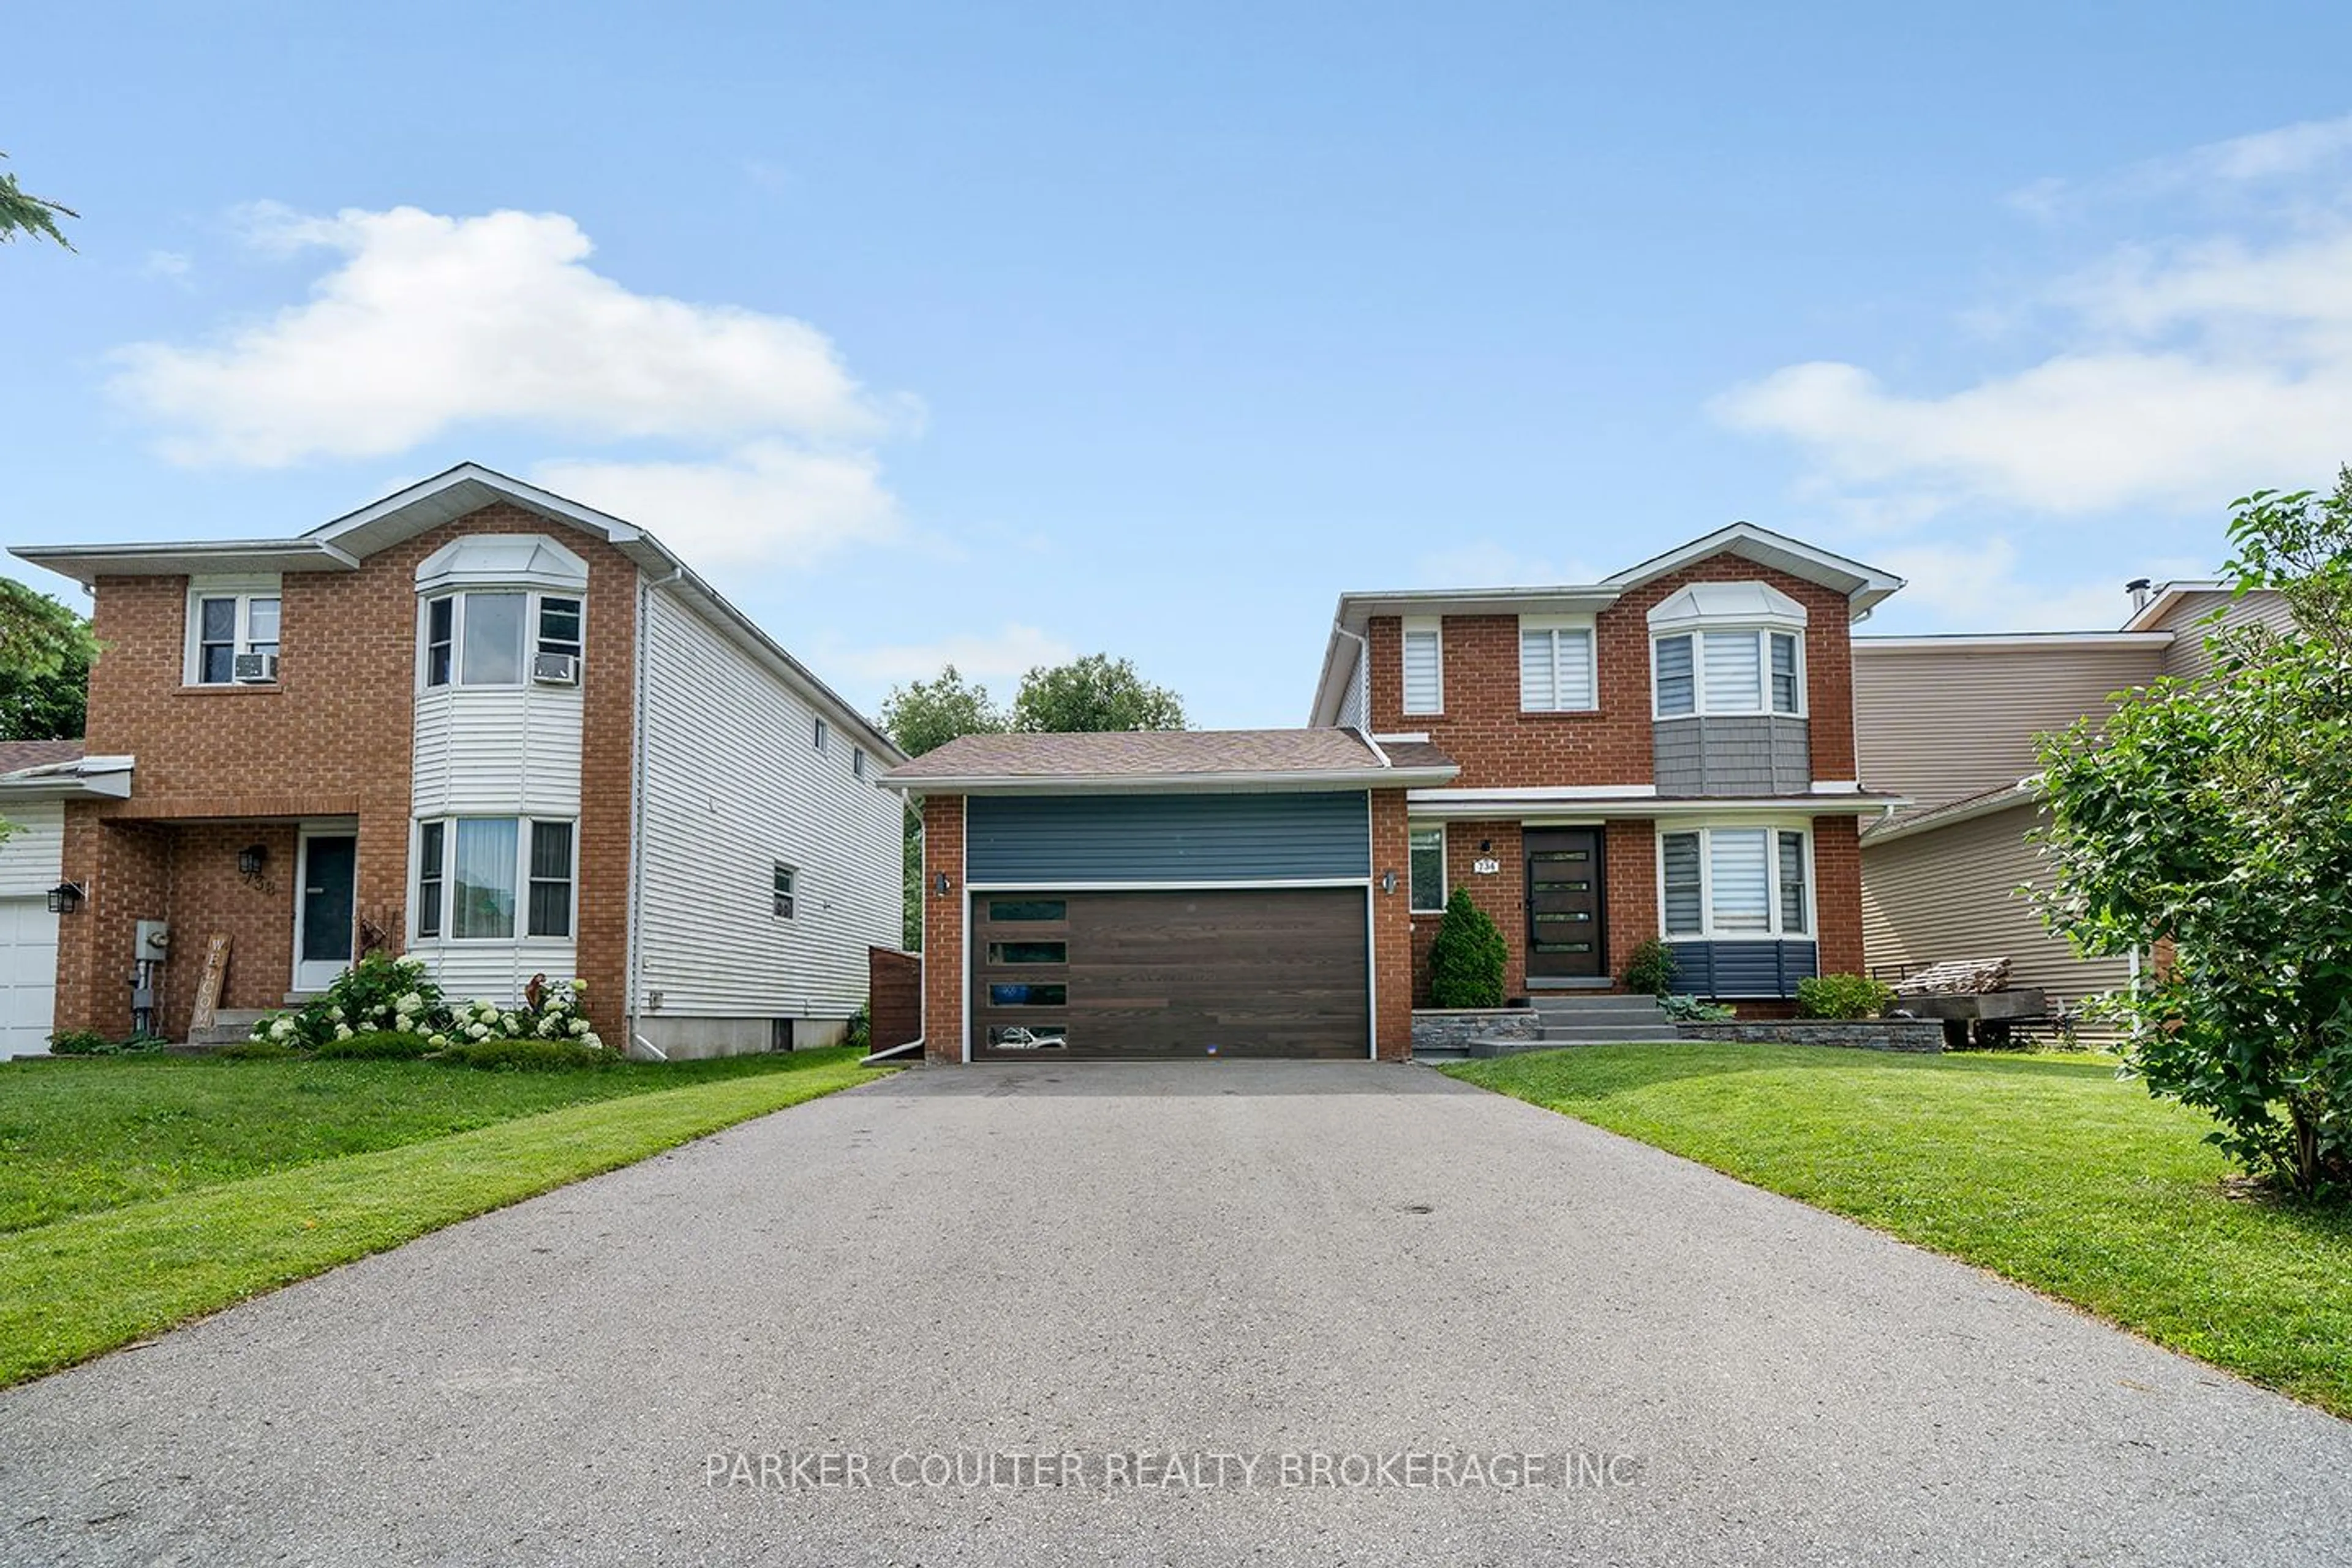 Frontside or backside of a home for 734 Candaras St, Innisfil Ontario L9S 2G9